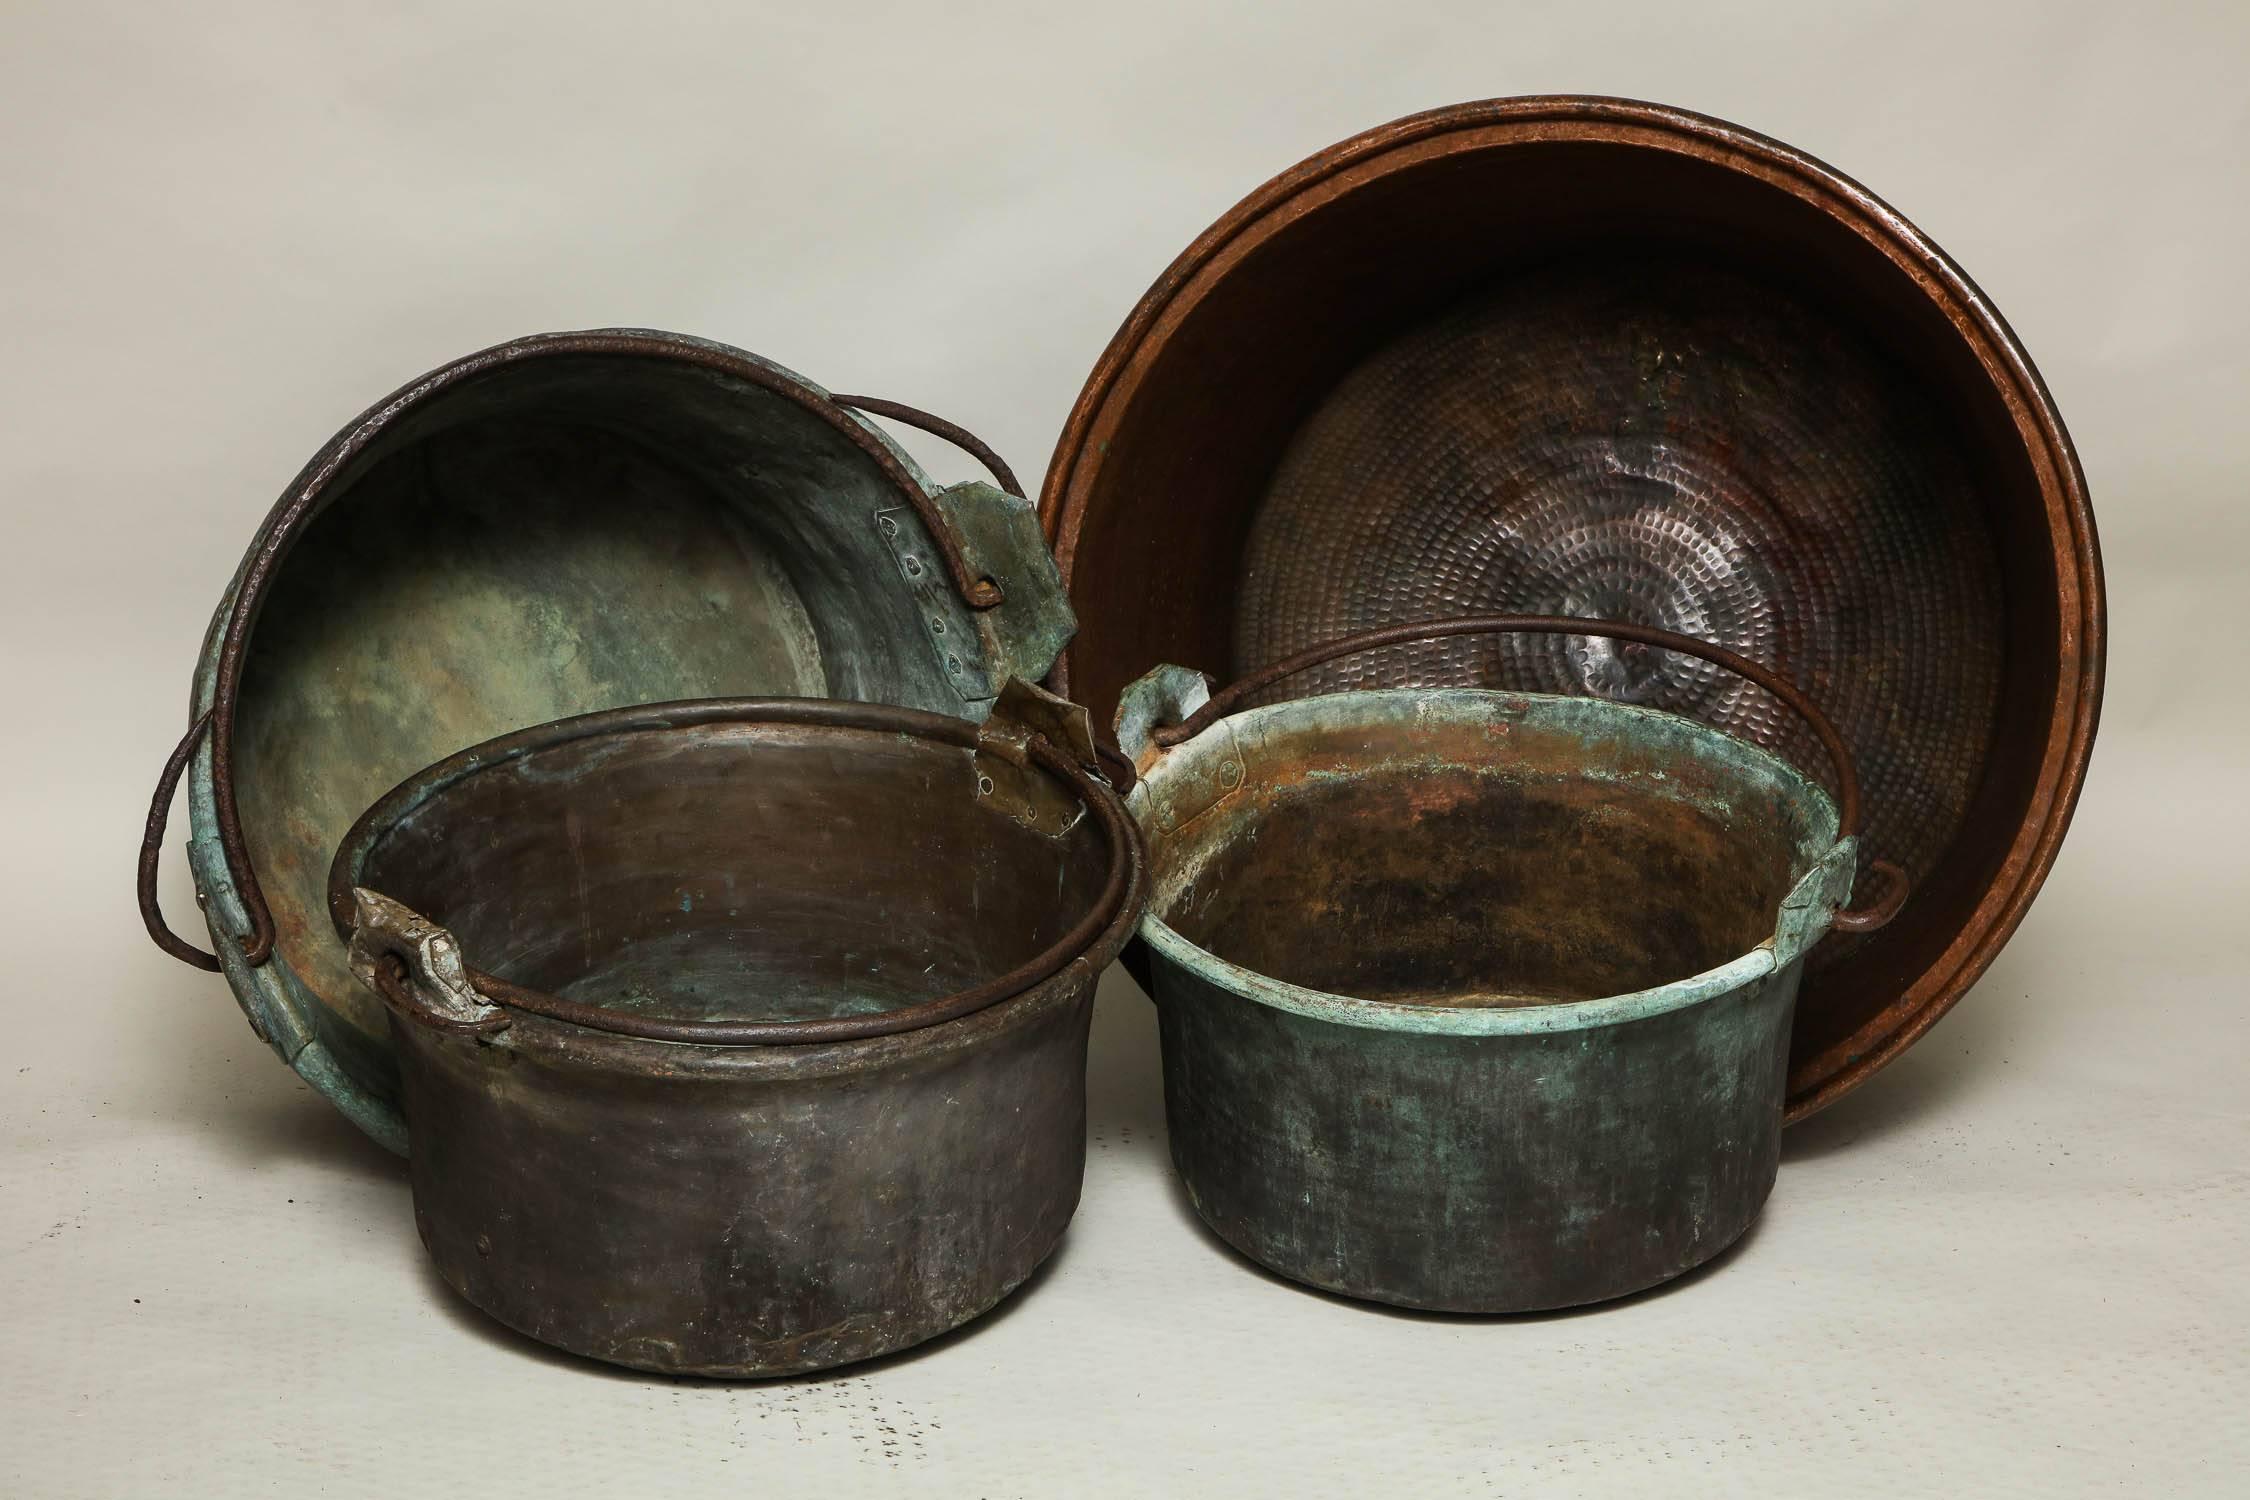 A collection of four copper containers useful next to a fireplace for logs.

A weathered copper container
A copper container with a weathered surface, flared sides and rolled rim and a wrought iron carrying handle mounted on riveted hinge ears.